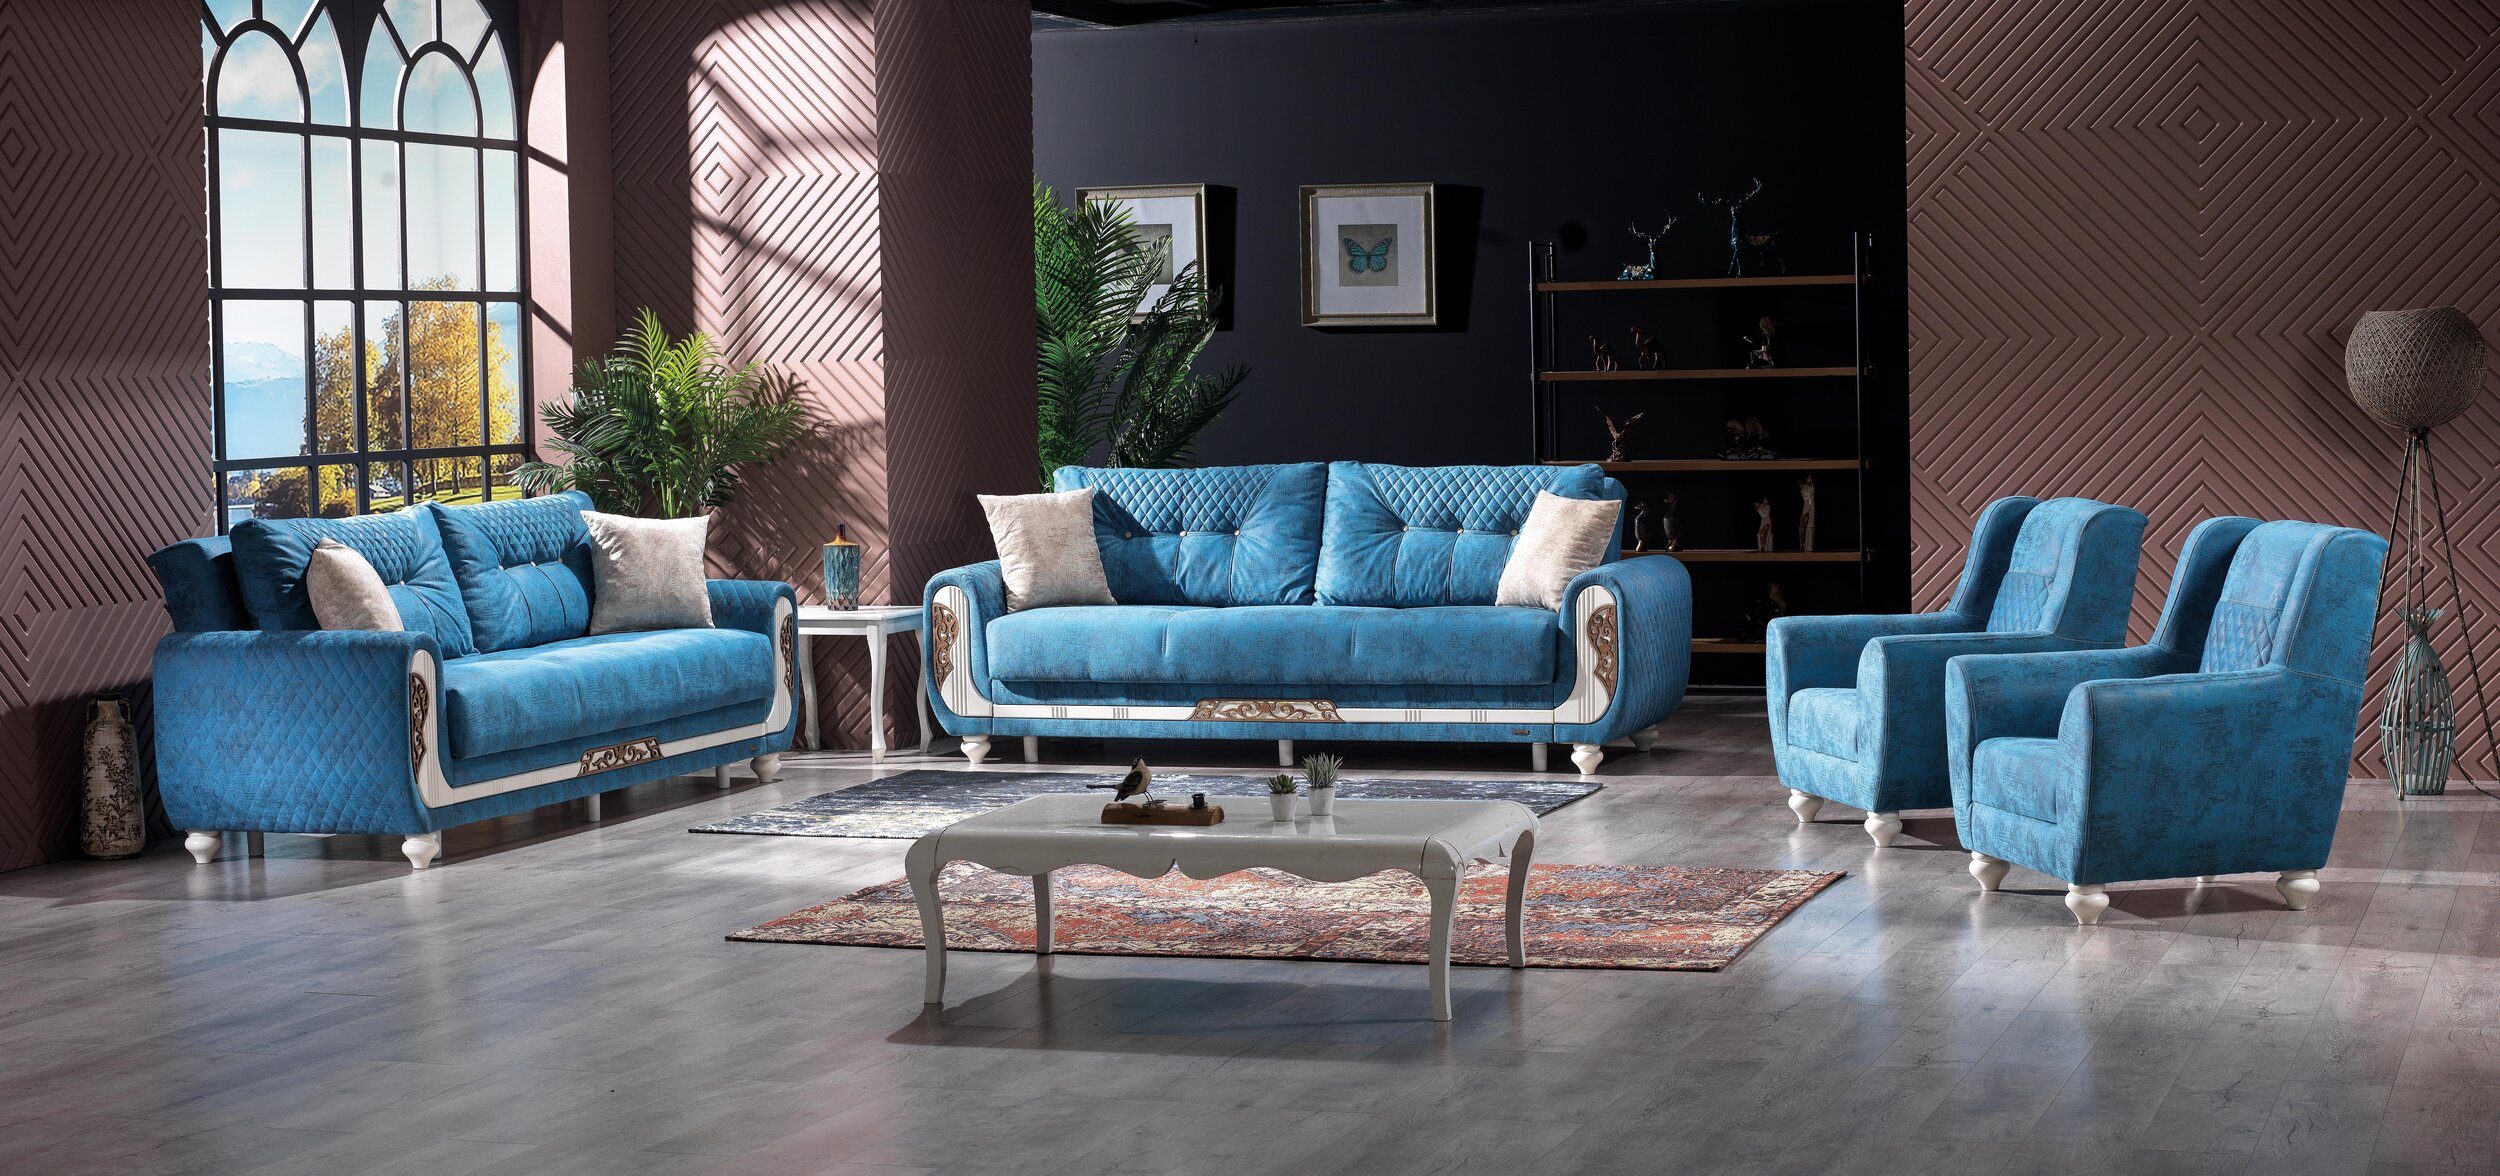 The Different Types of Sofas On Pepperfry - To Help you Buy, Compare & Save!